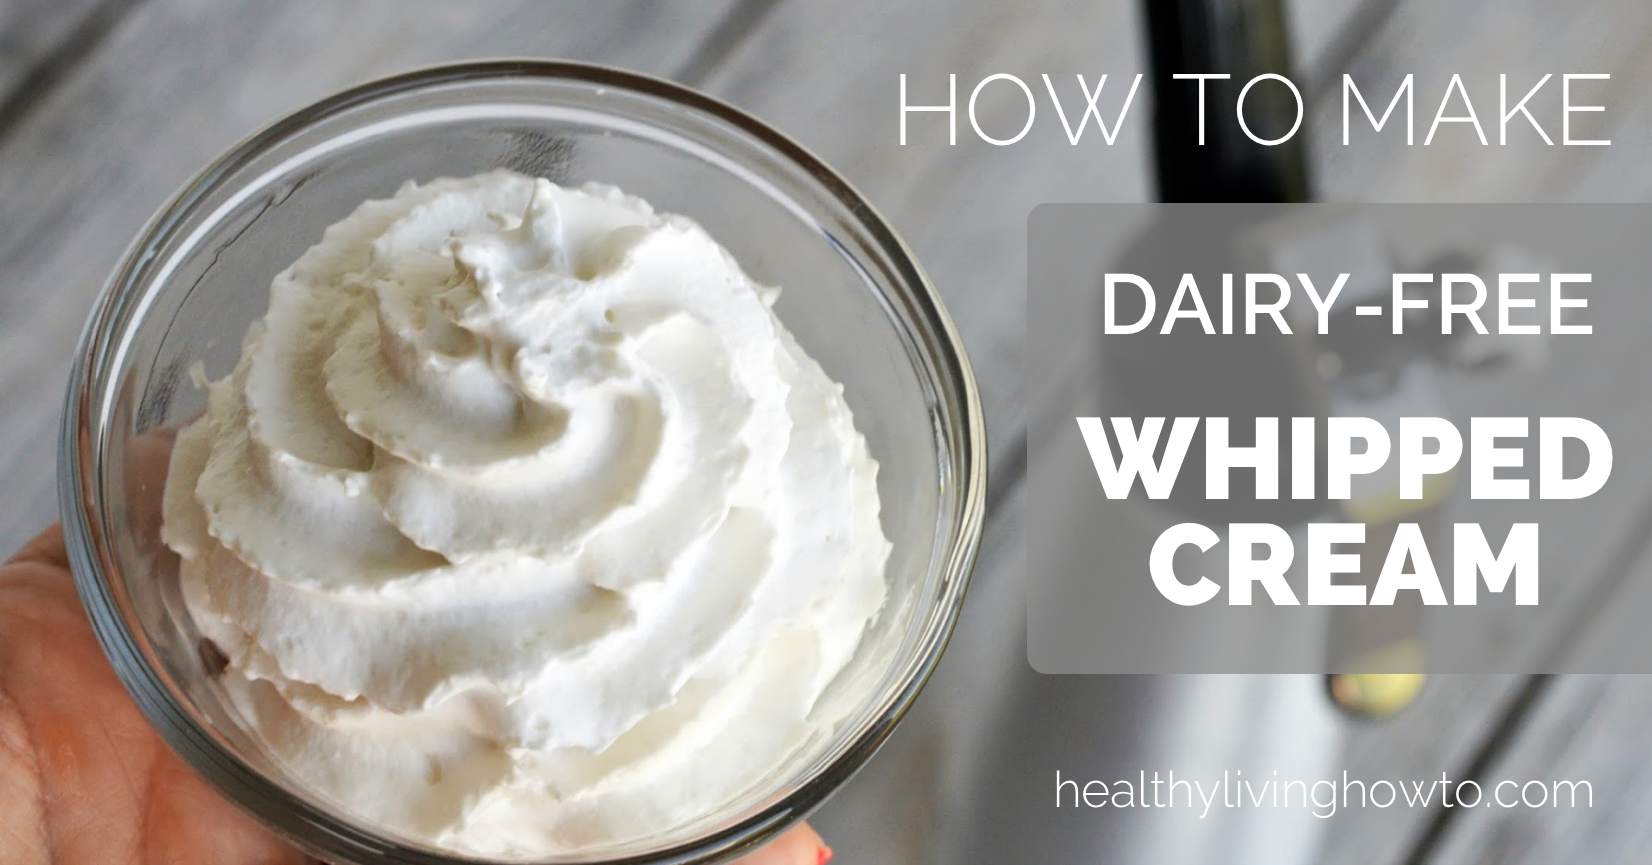 How To Make Dairy Free Whipped Cream | healthylivinghowto.com